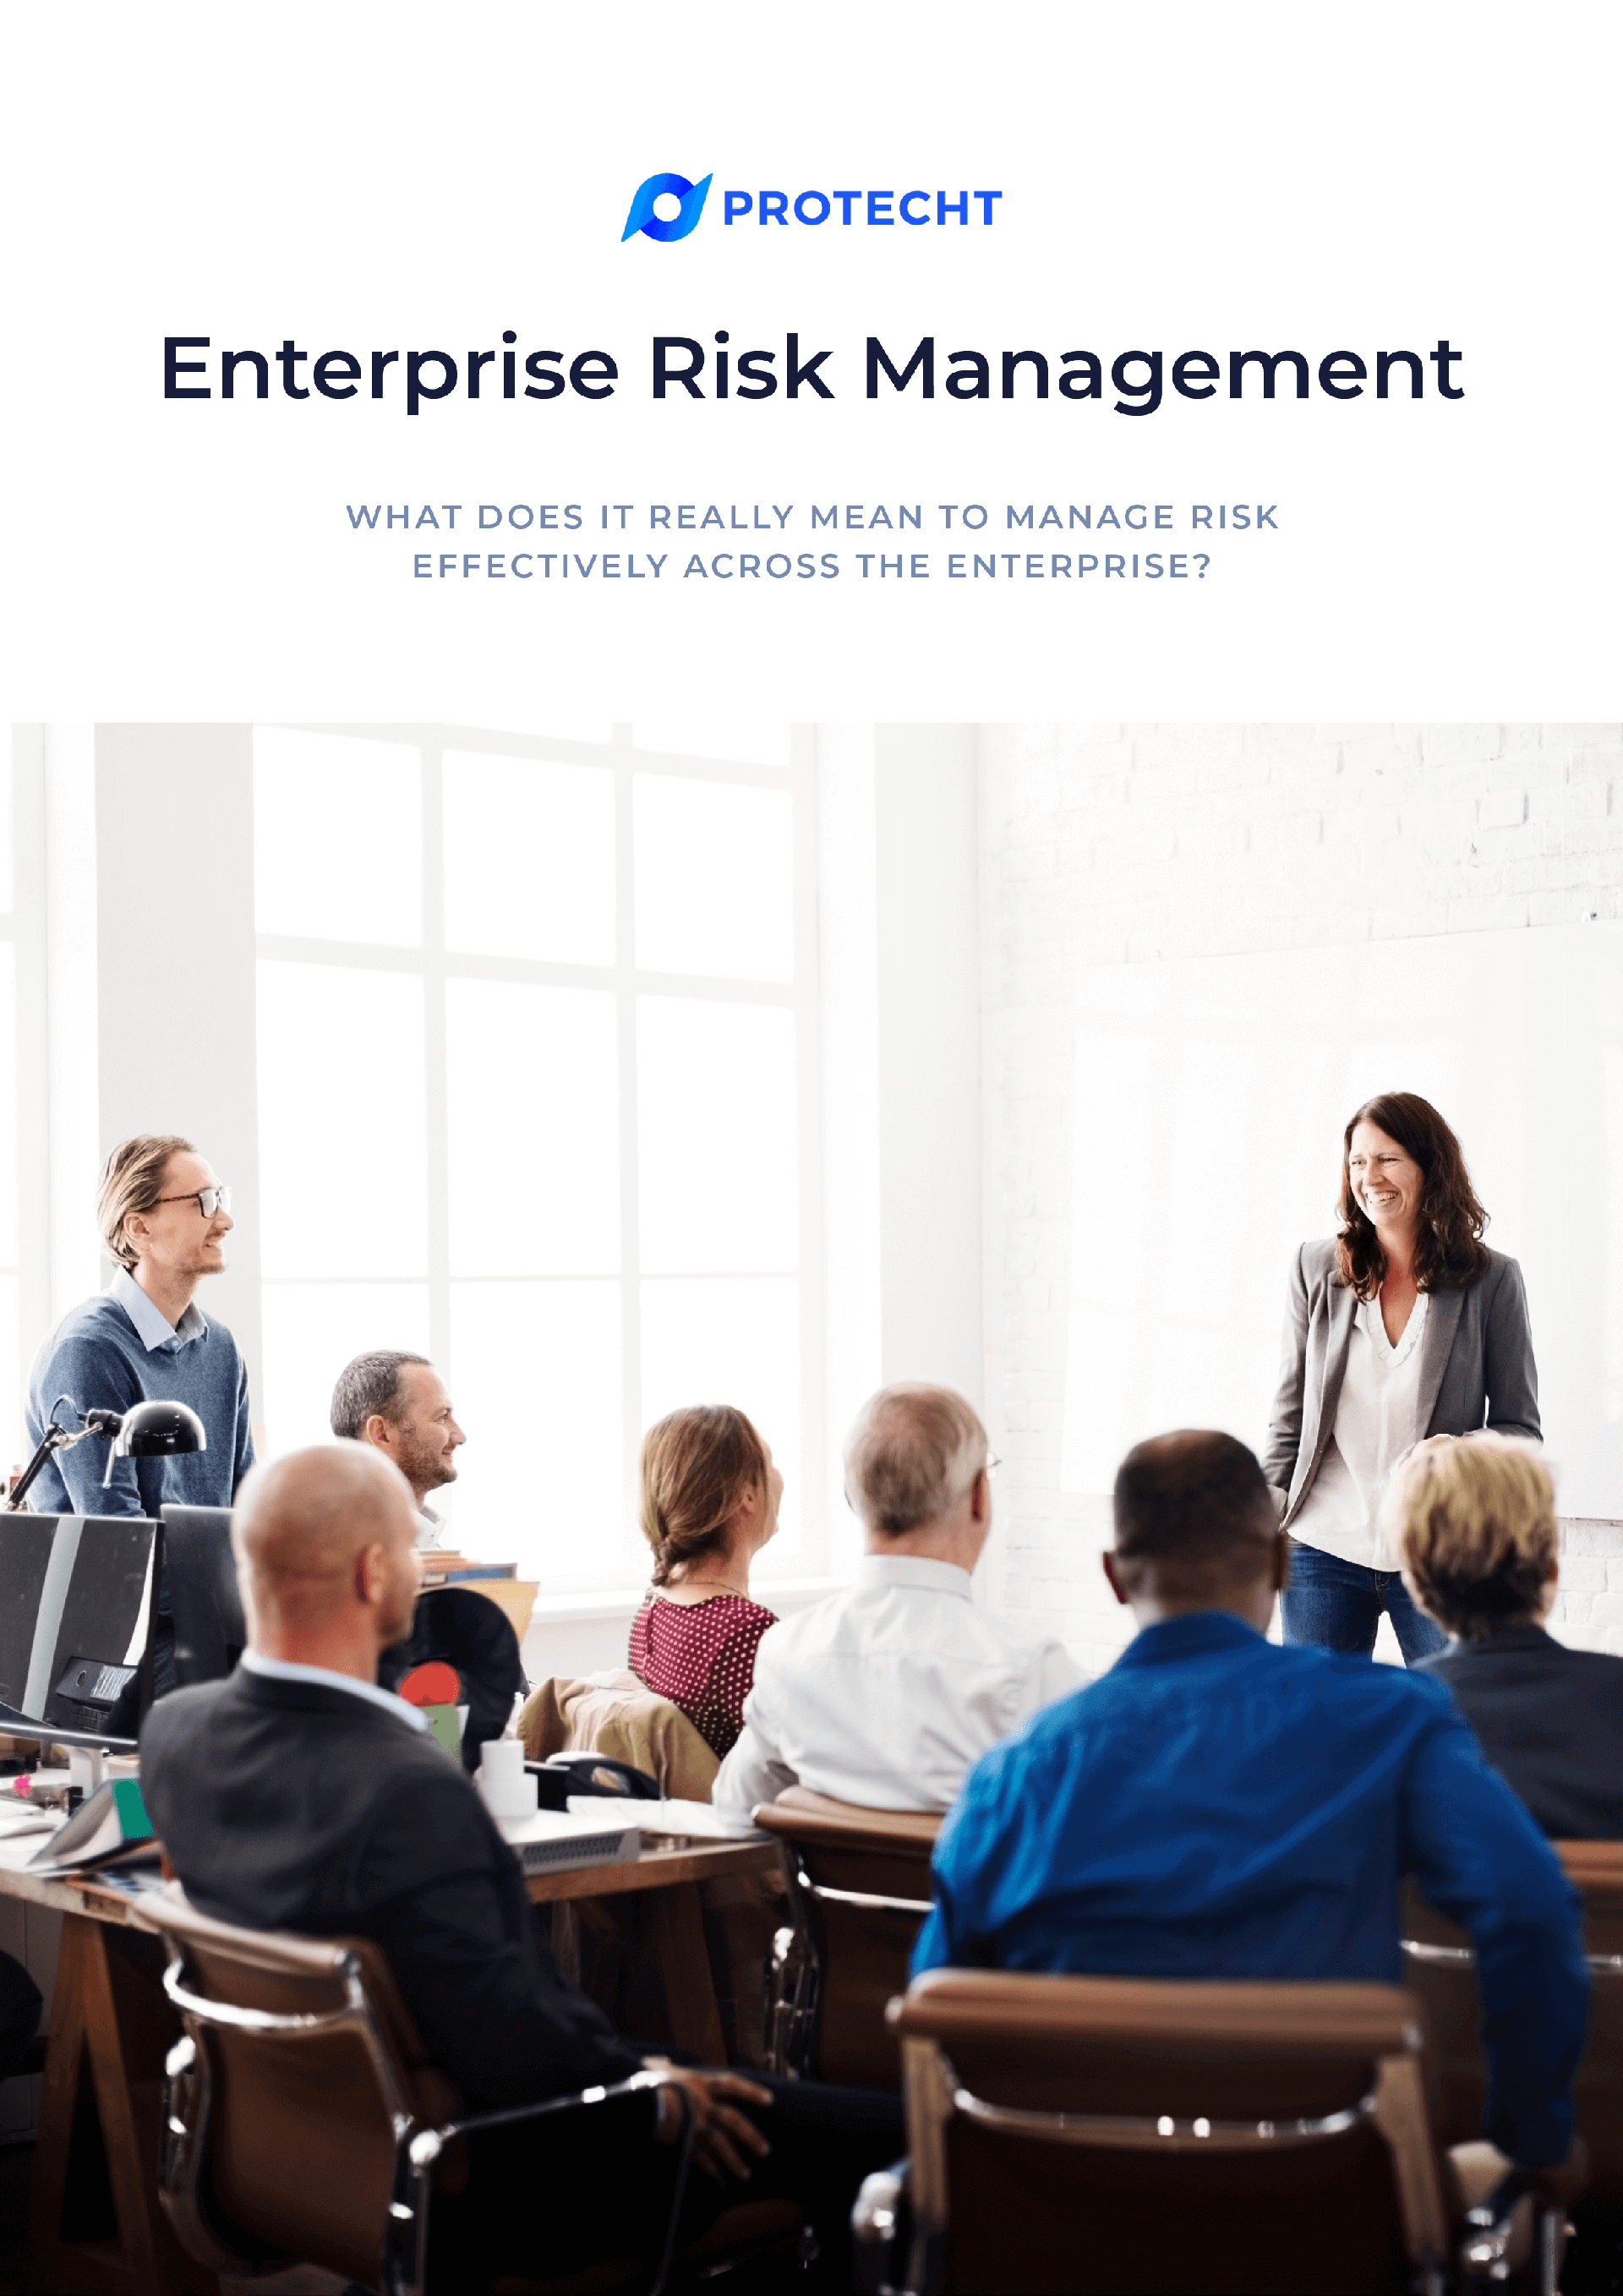 ebook-Protecht-ERM-What-It-Means-to-Manage-Risk-Across-the-Enterprise-cover